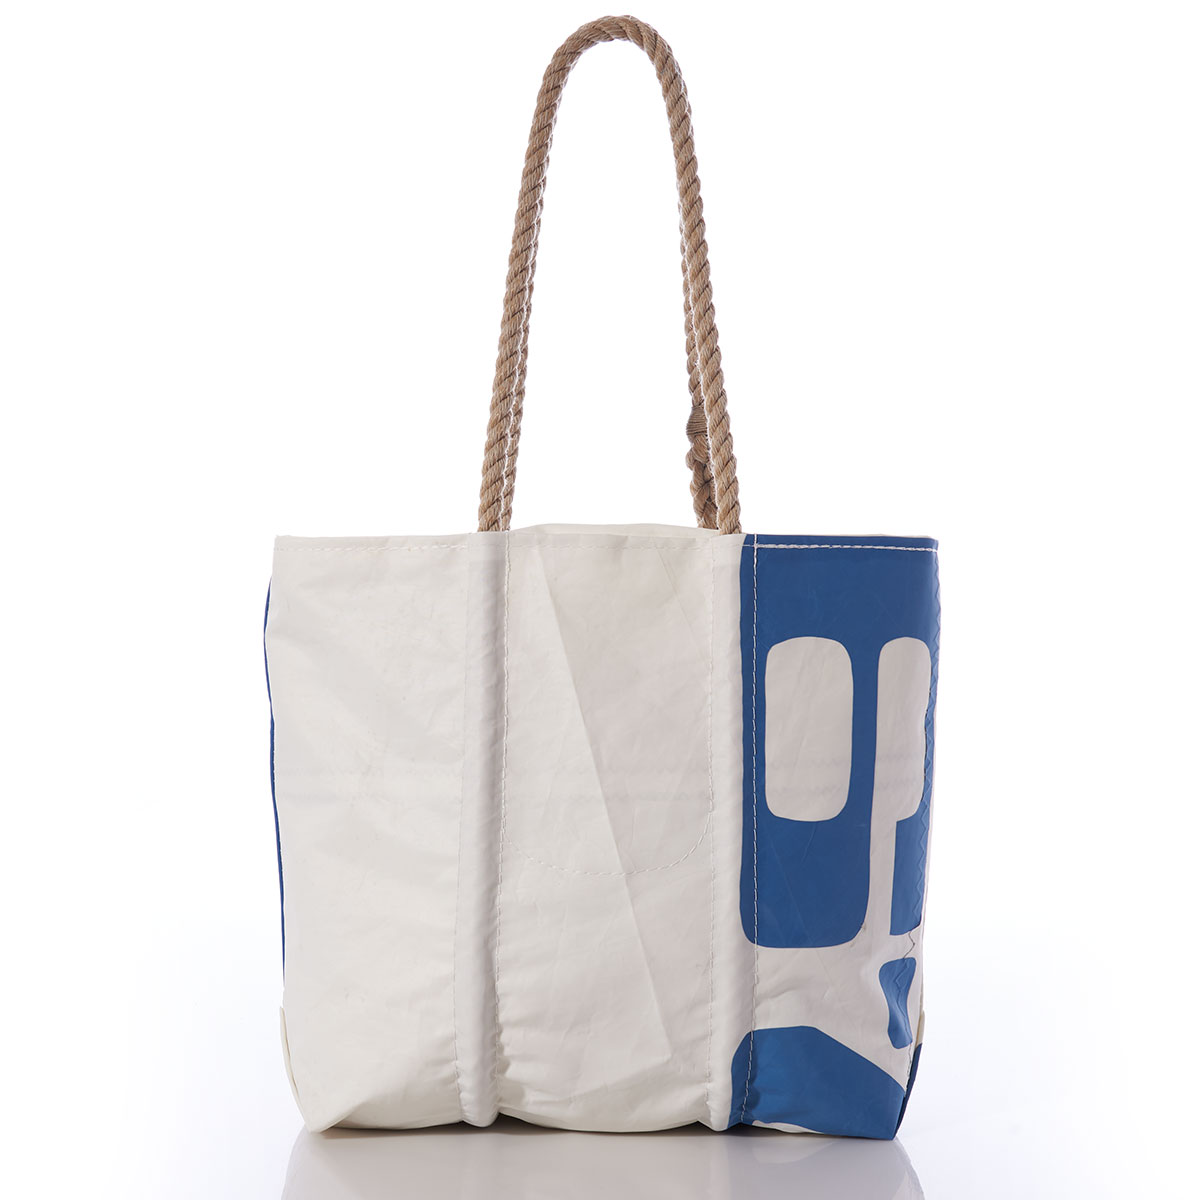 Deluxe Vintage S 22.9 Tote